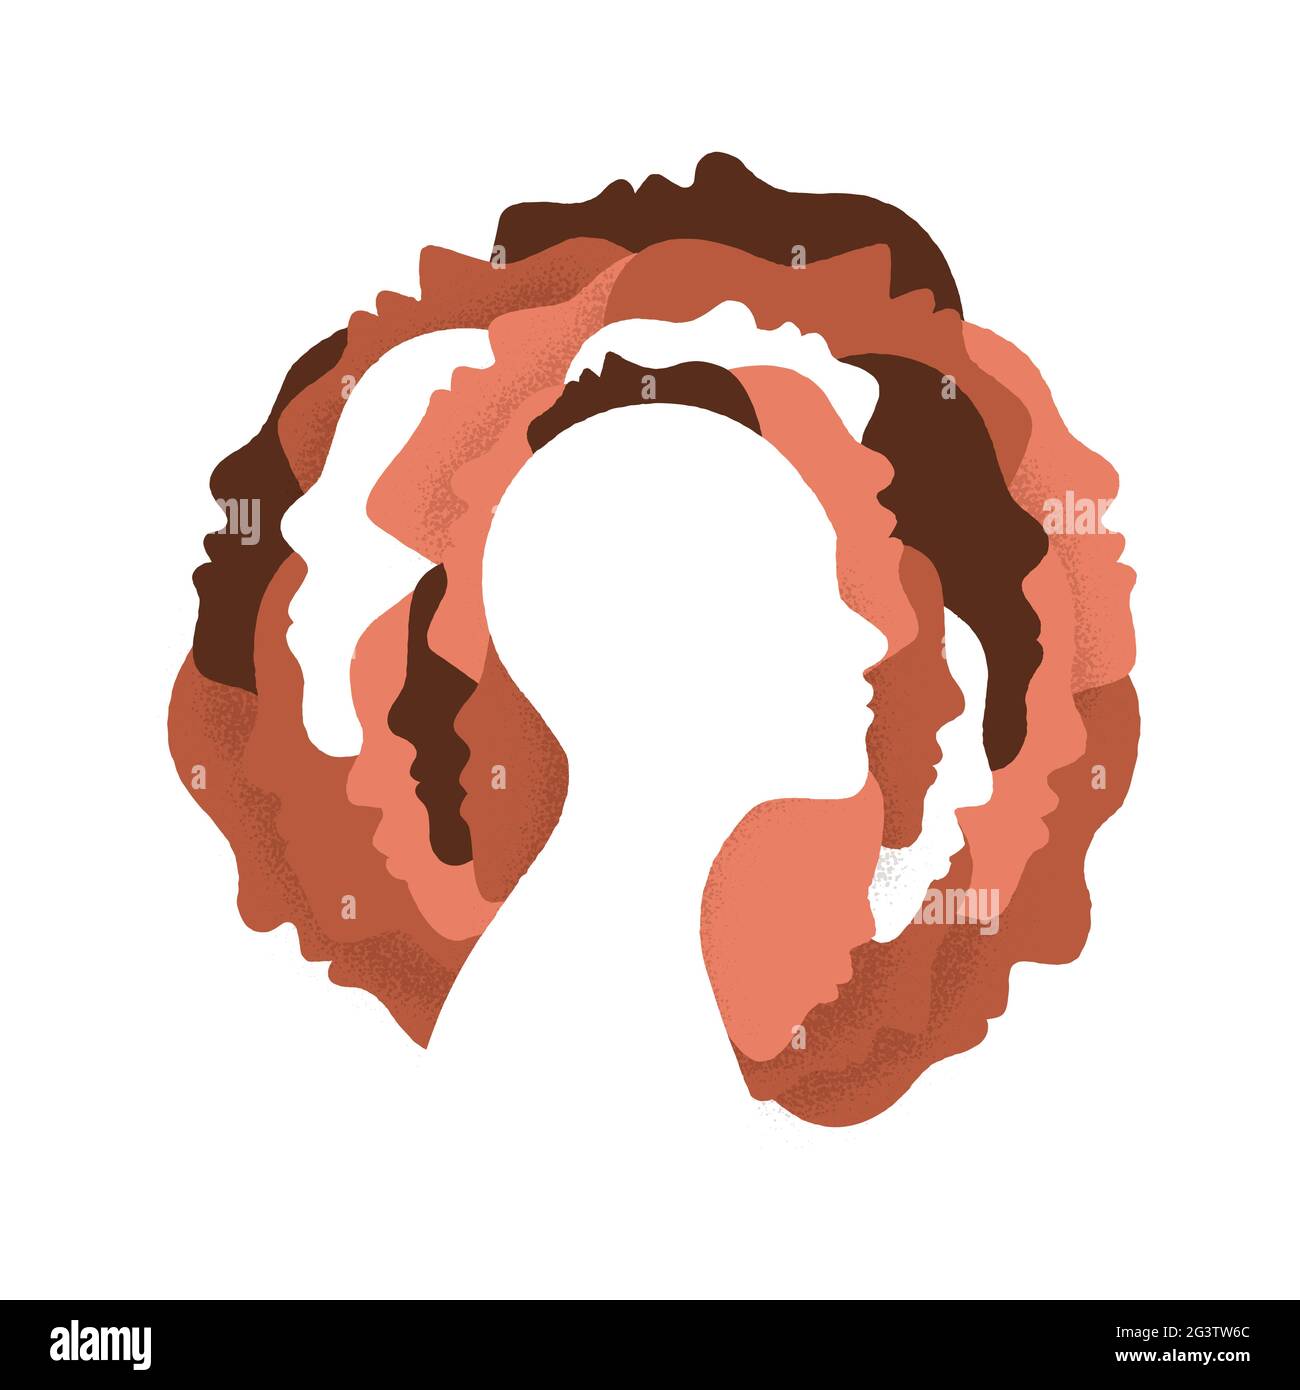 Diverse people faces together with different skin color on isolated background for multiethnic social group or culture mix concept. Stock Vector